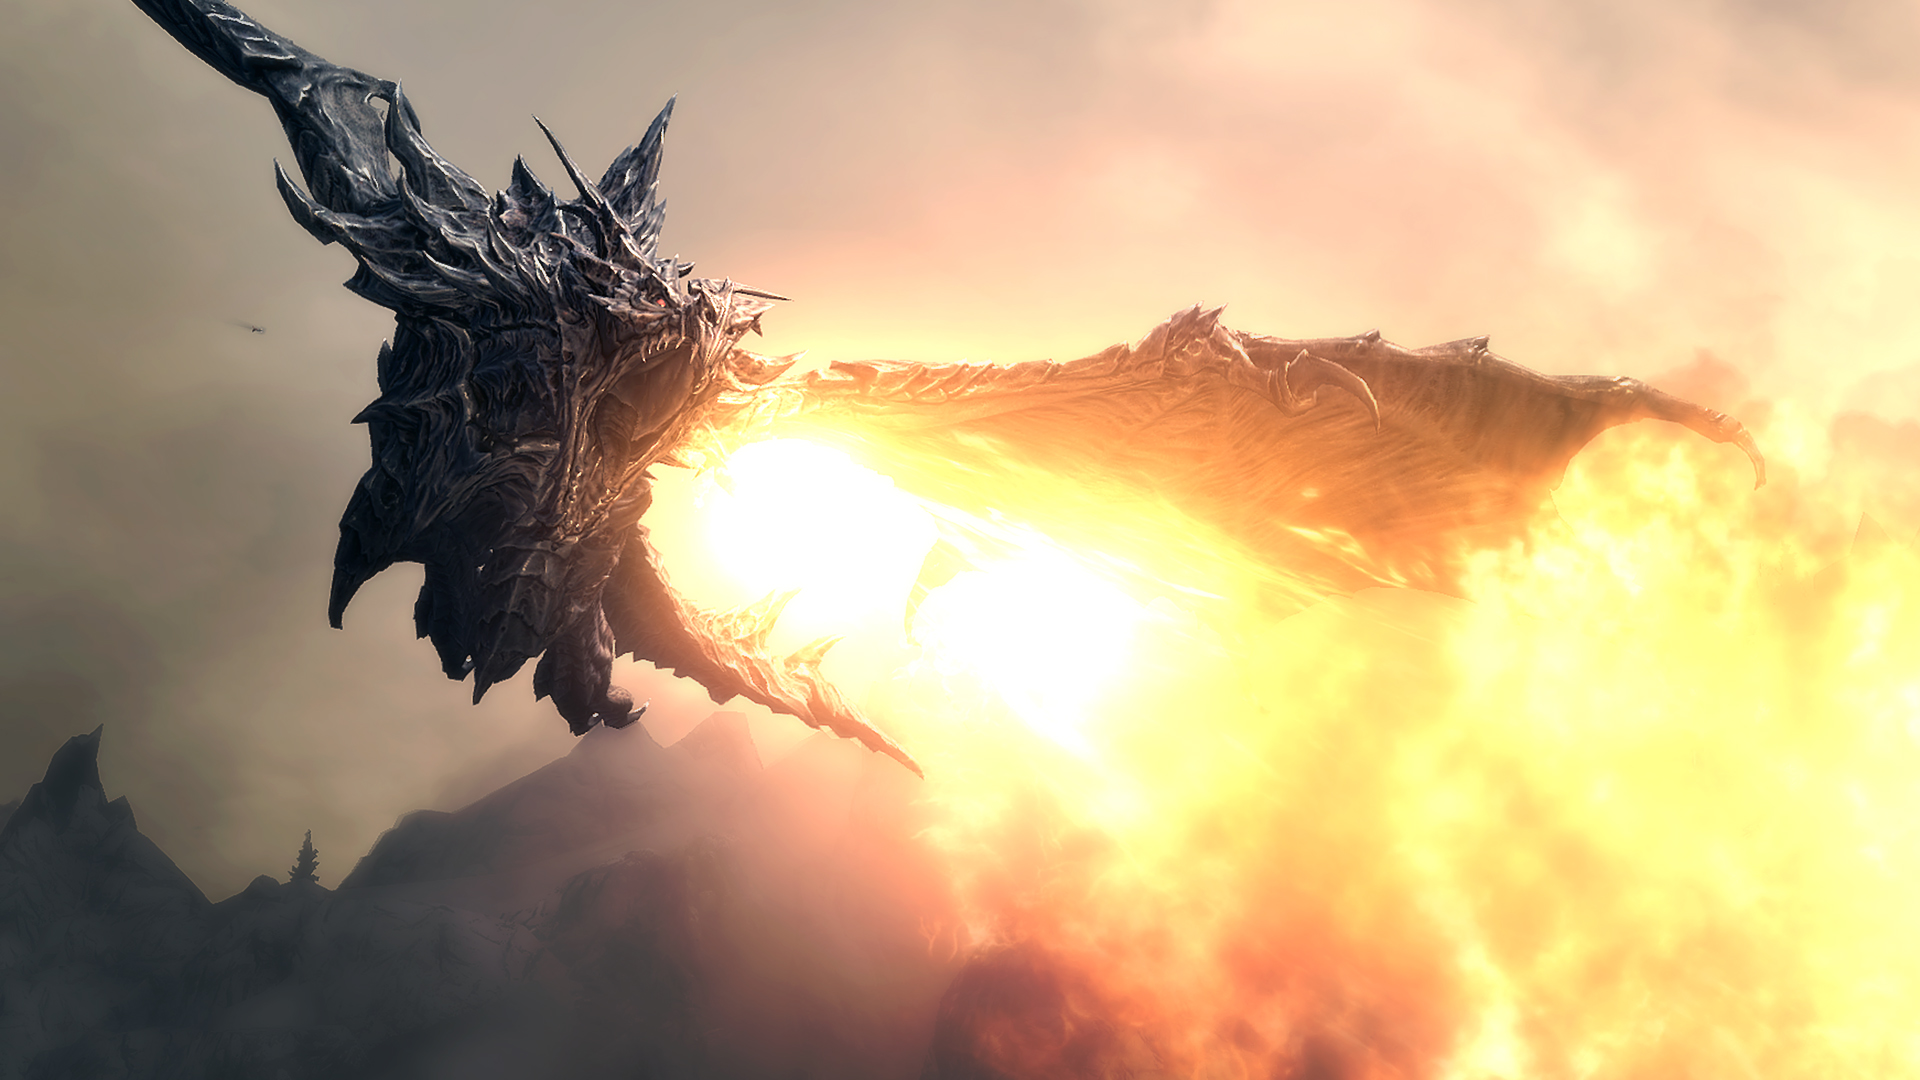 Taking On The Villainous Dragons Of Skyrim And Their Leader Alduin